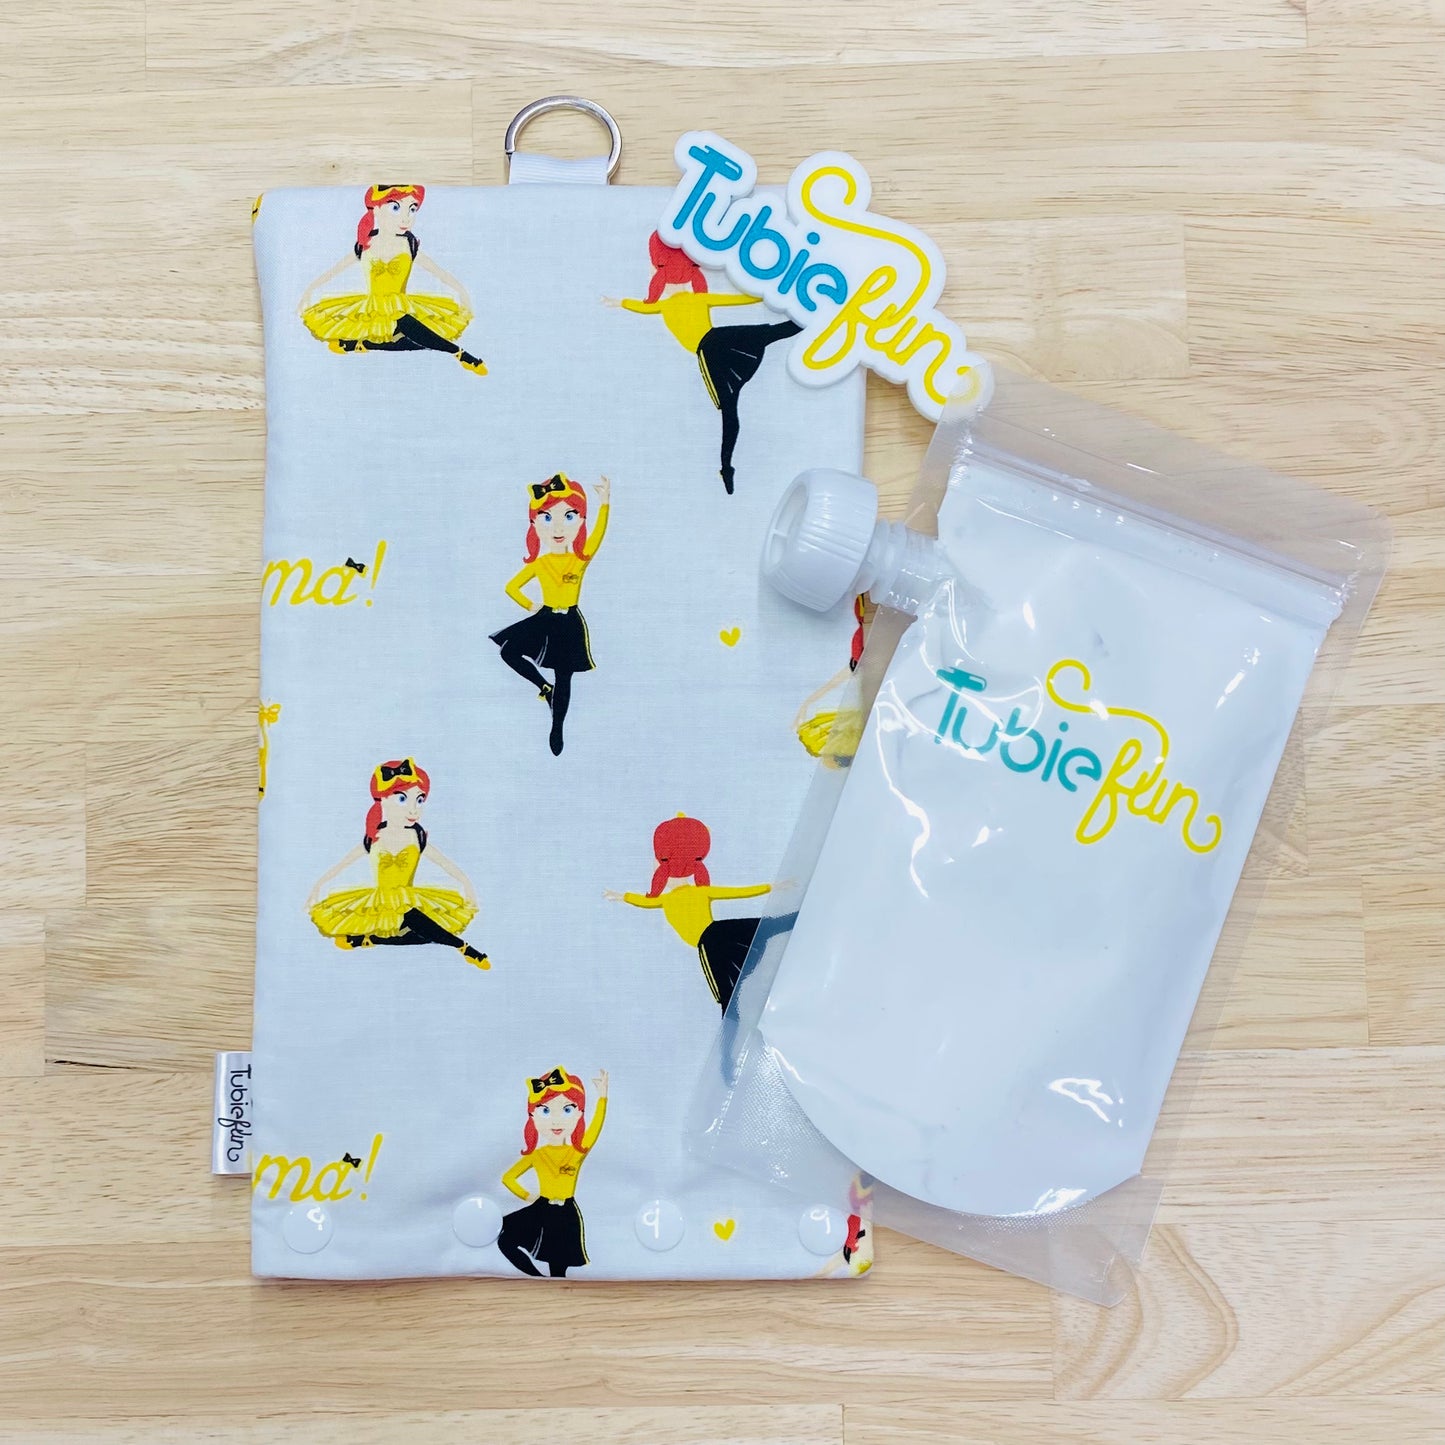 NEW Insulated Milk Bag Suitable for Tubie Fun 500ml Reusable Pouches - Wiggly Ballerina